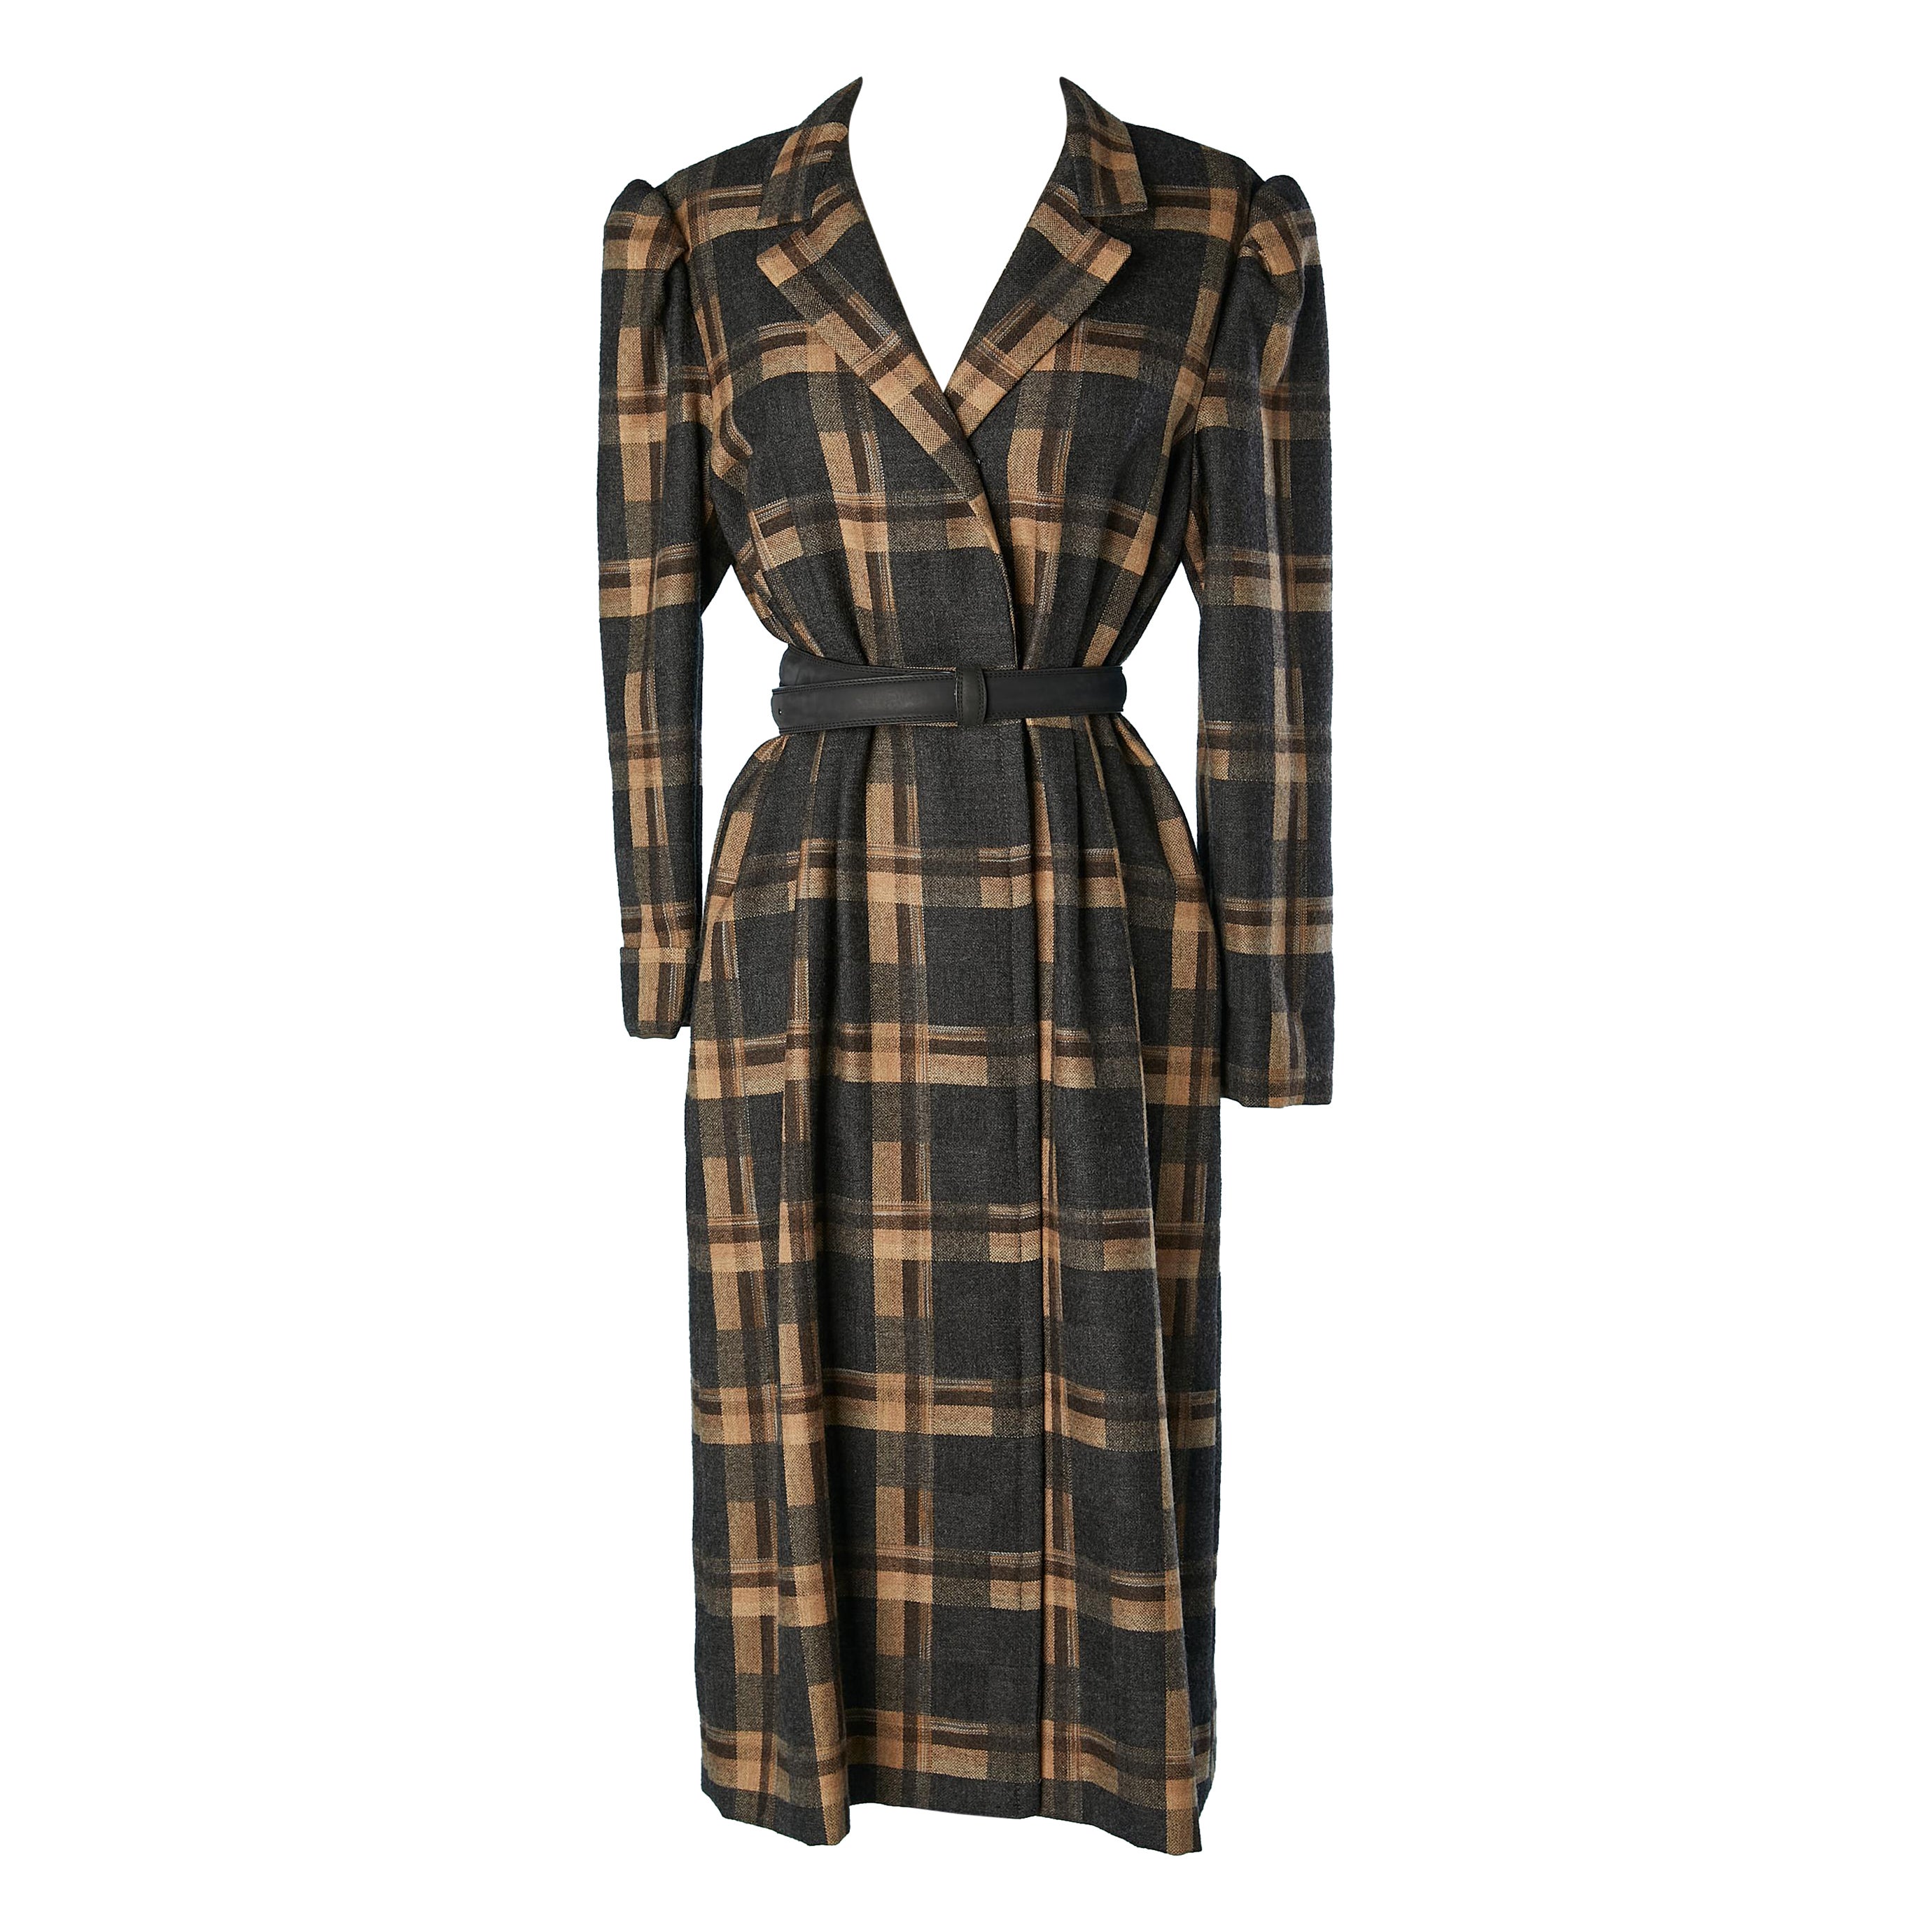 Wool tartan dress-coat  with leather belt GALANOS for Neiman Marcus 